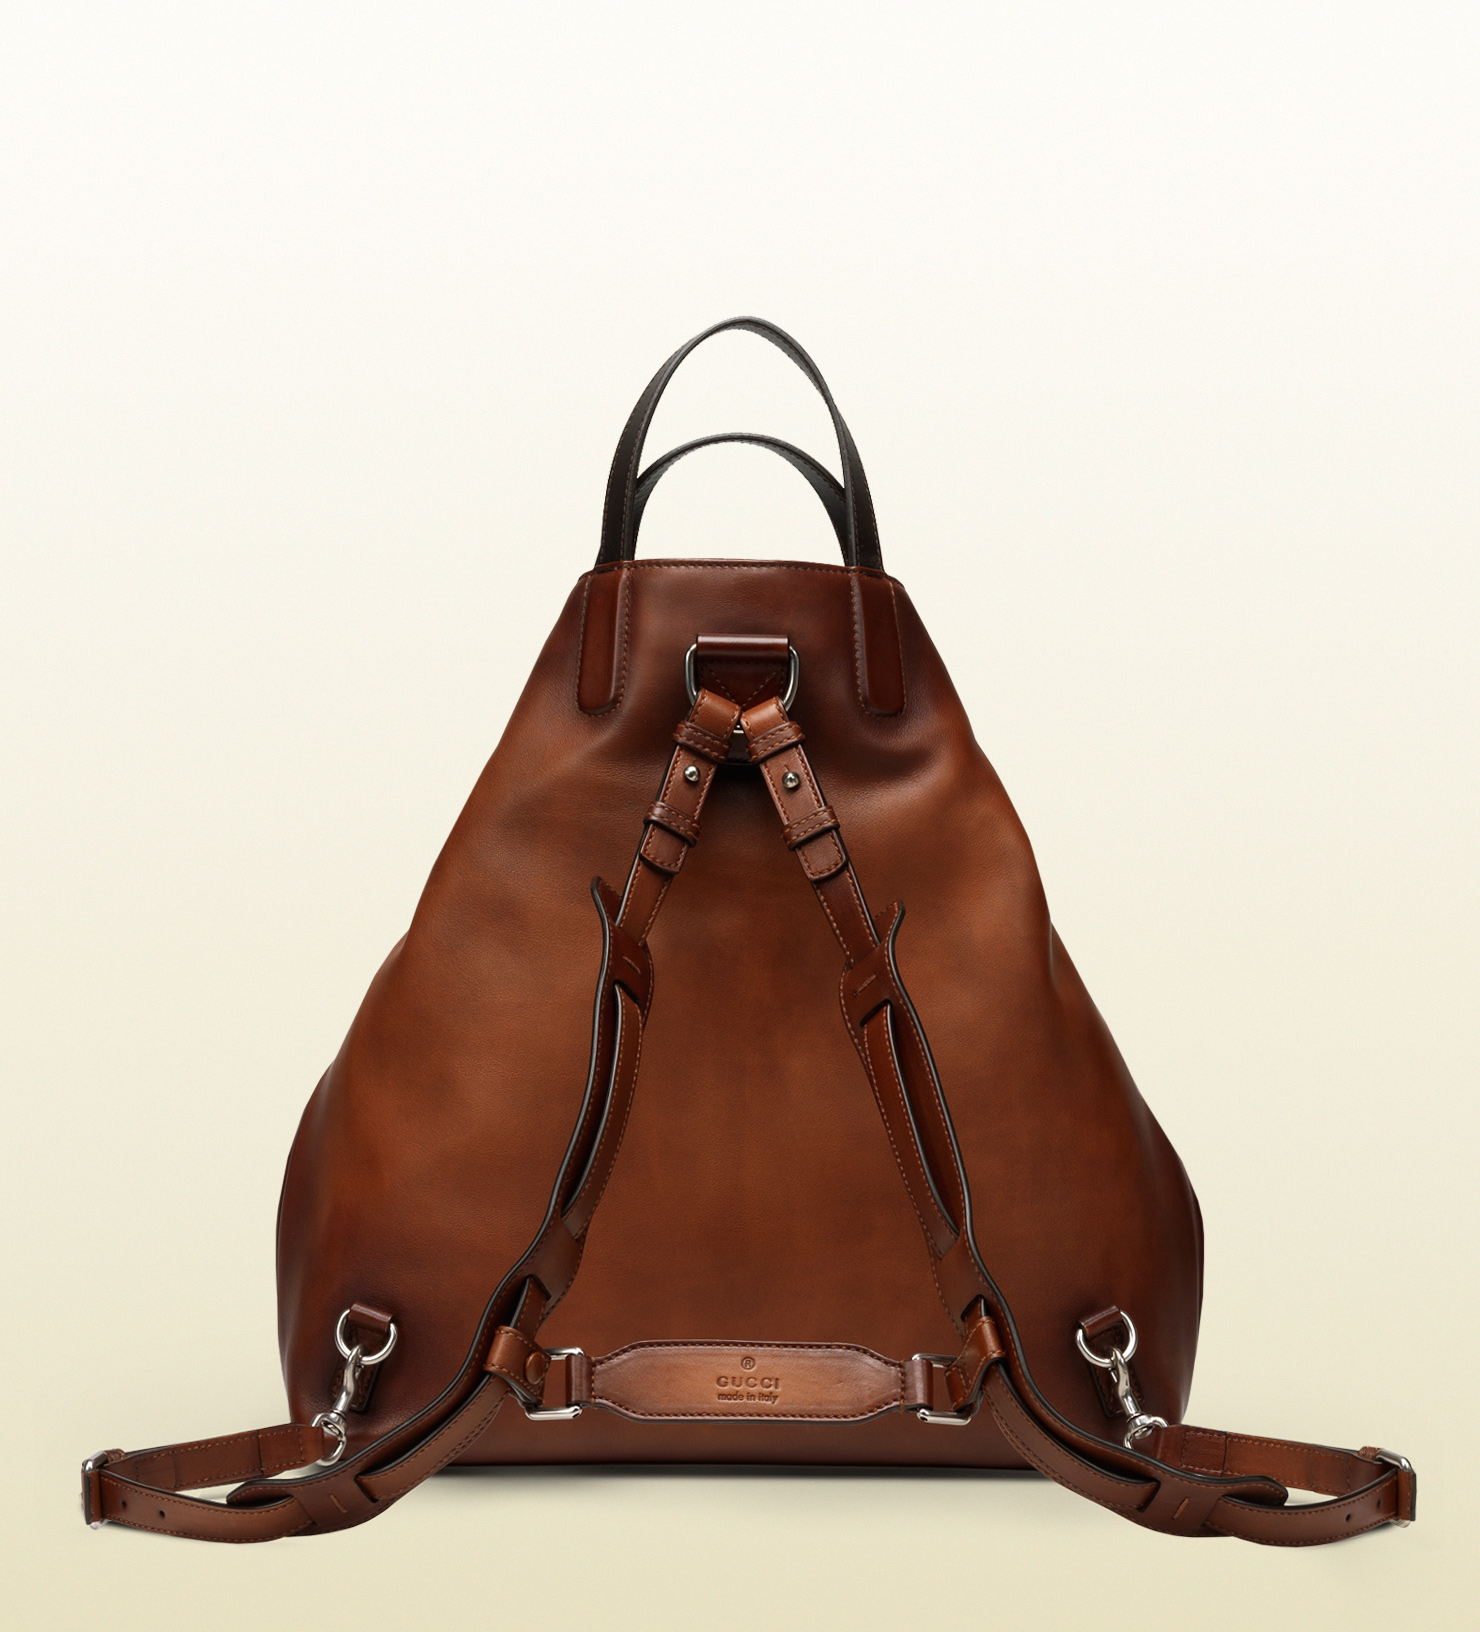 Lyst - Gucci Gactive Dark Brown Leather Backpack in Brown for Men